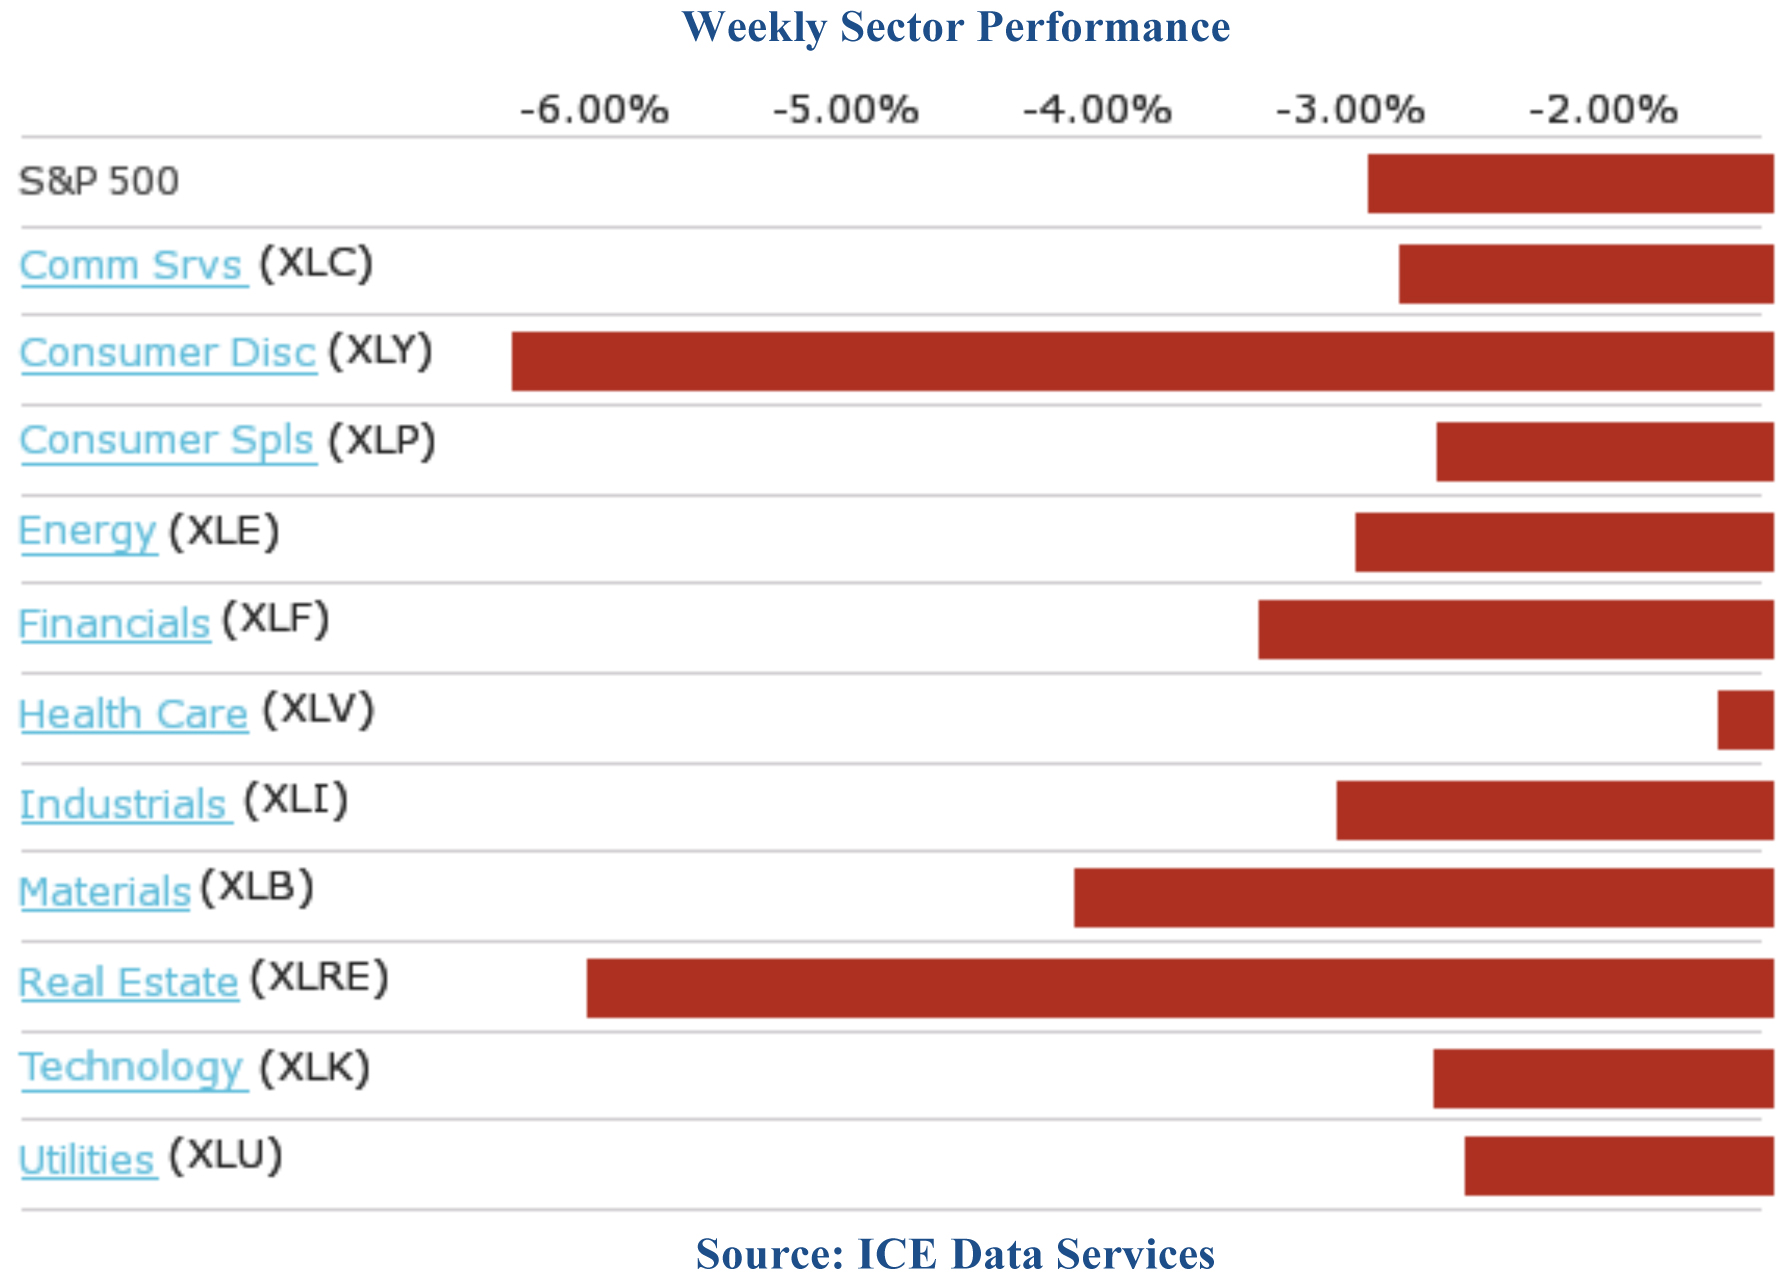 Weekly Sector Performance Bar Chart